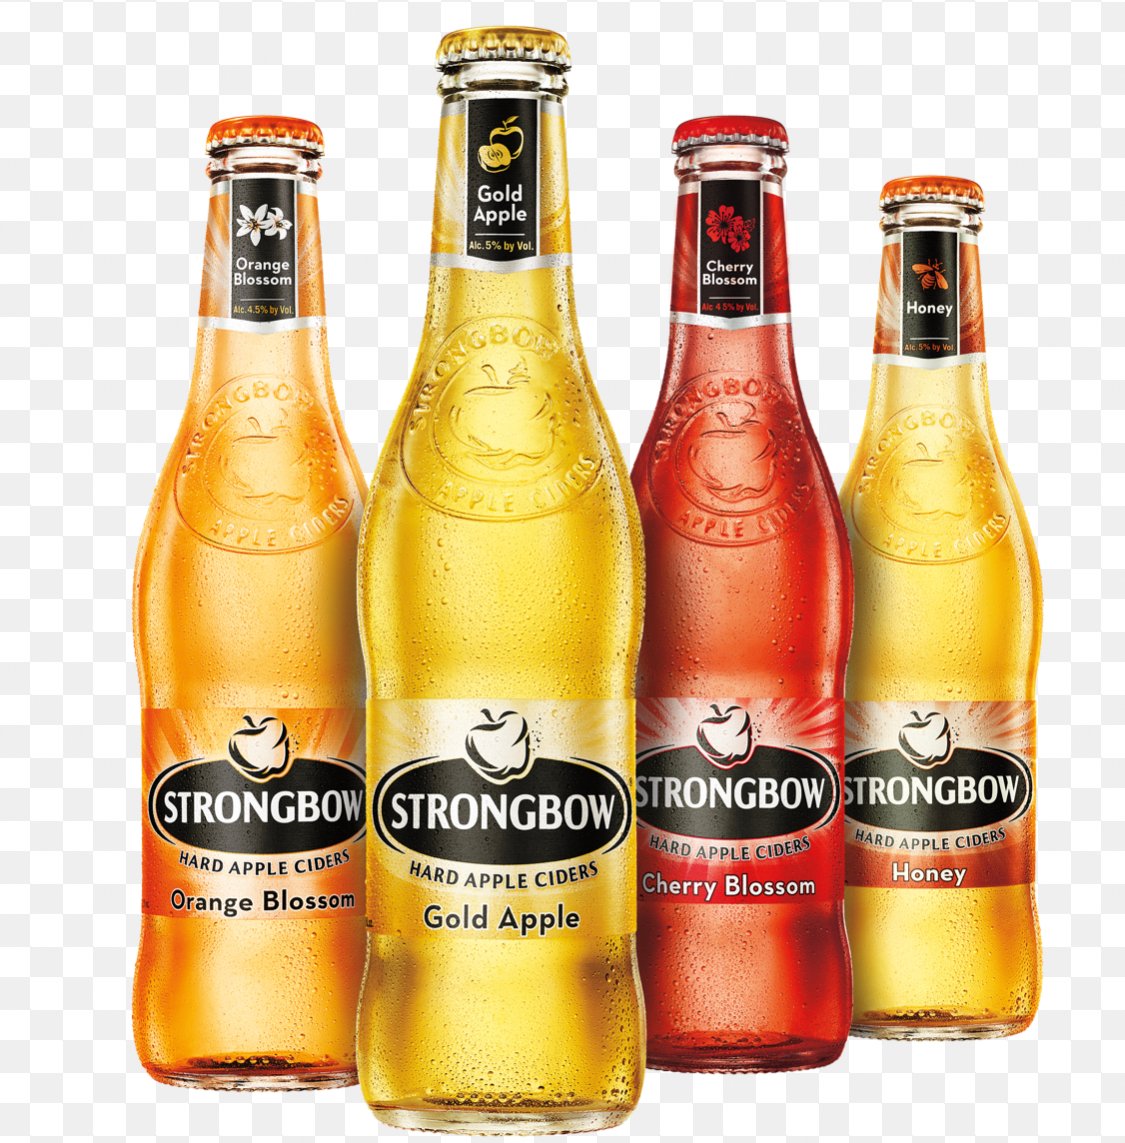 Strongbow cidru red berries/gold apple